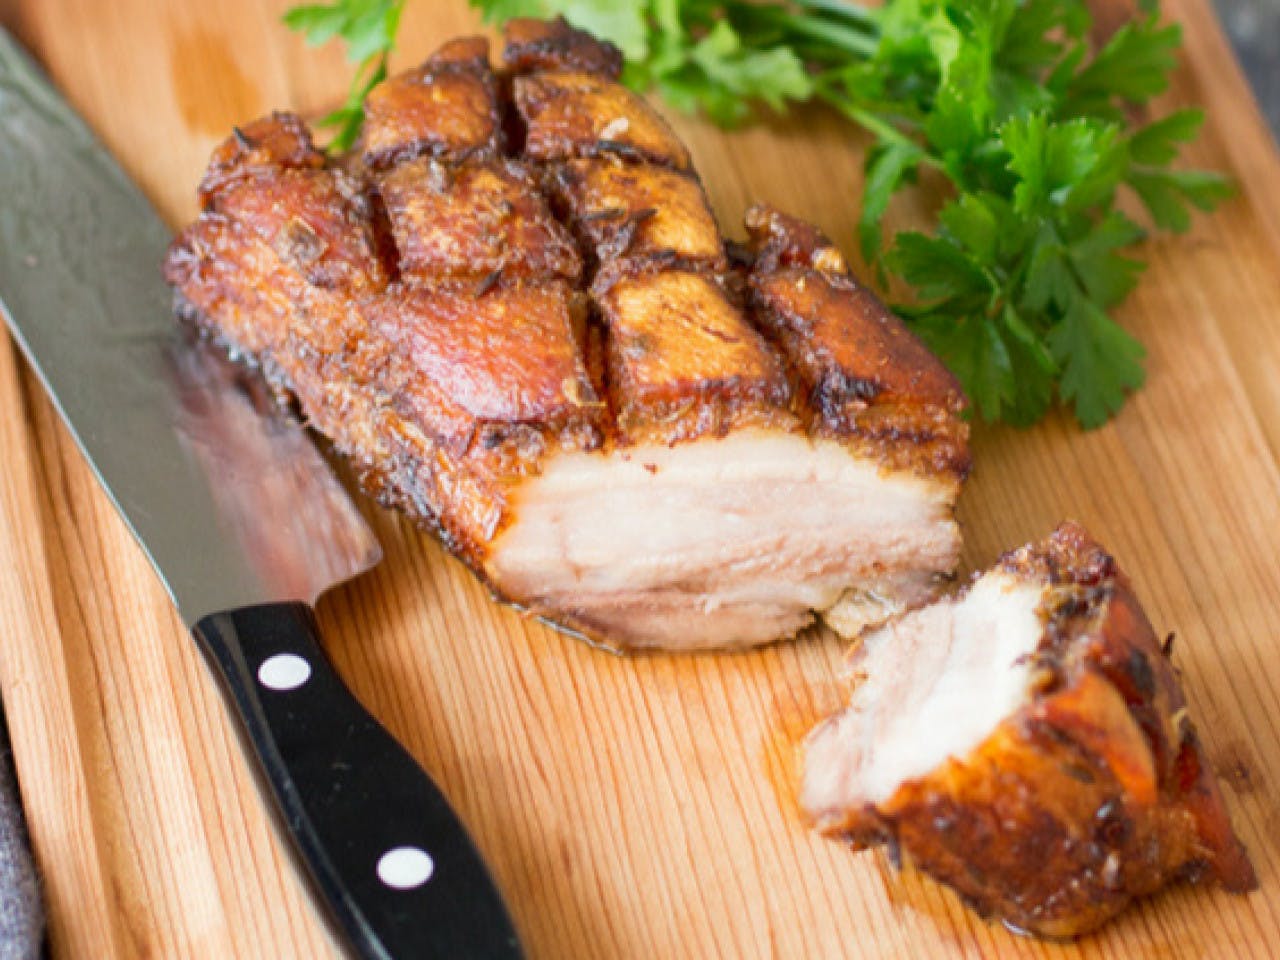 Crispy pork belly from the oven